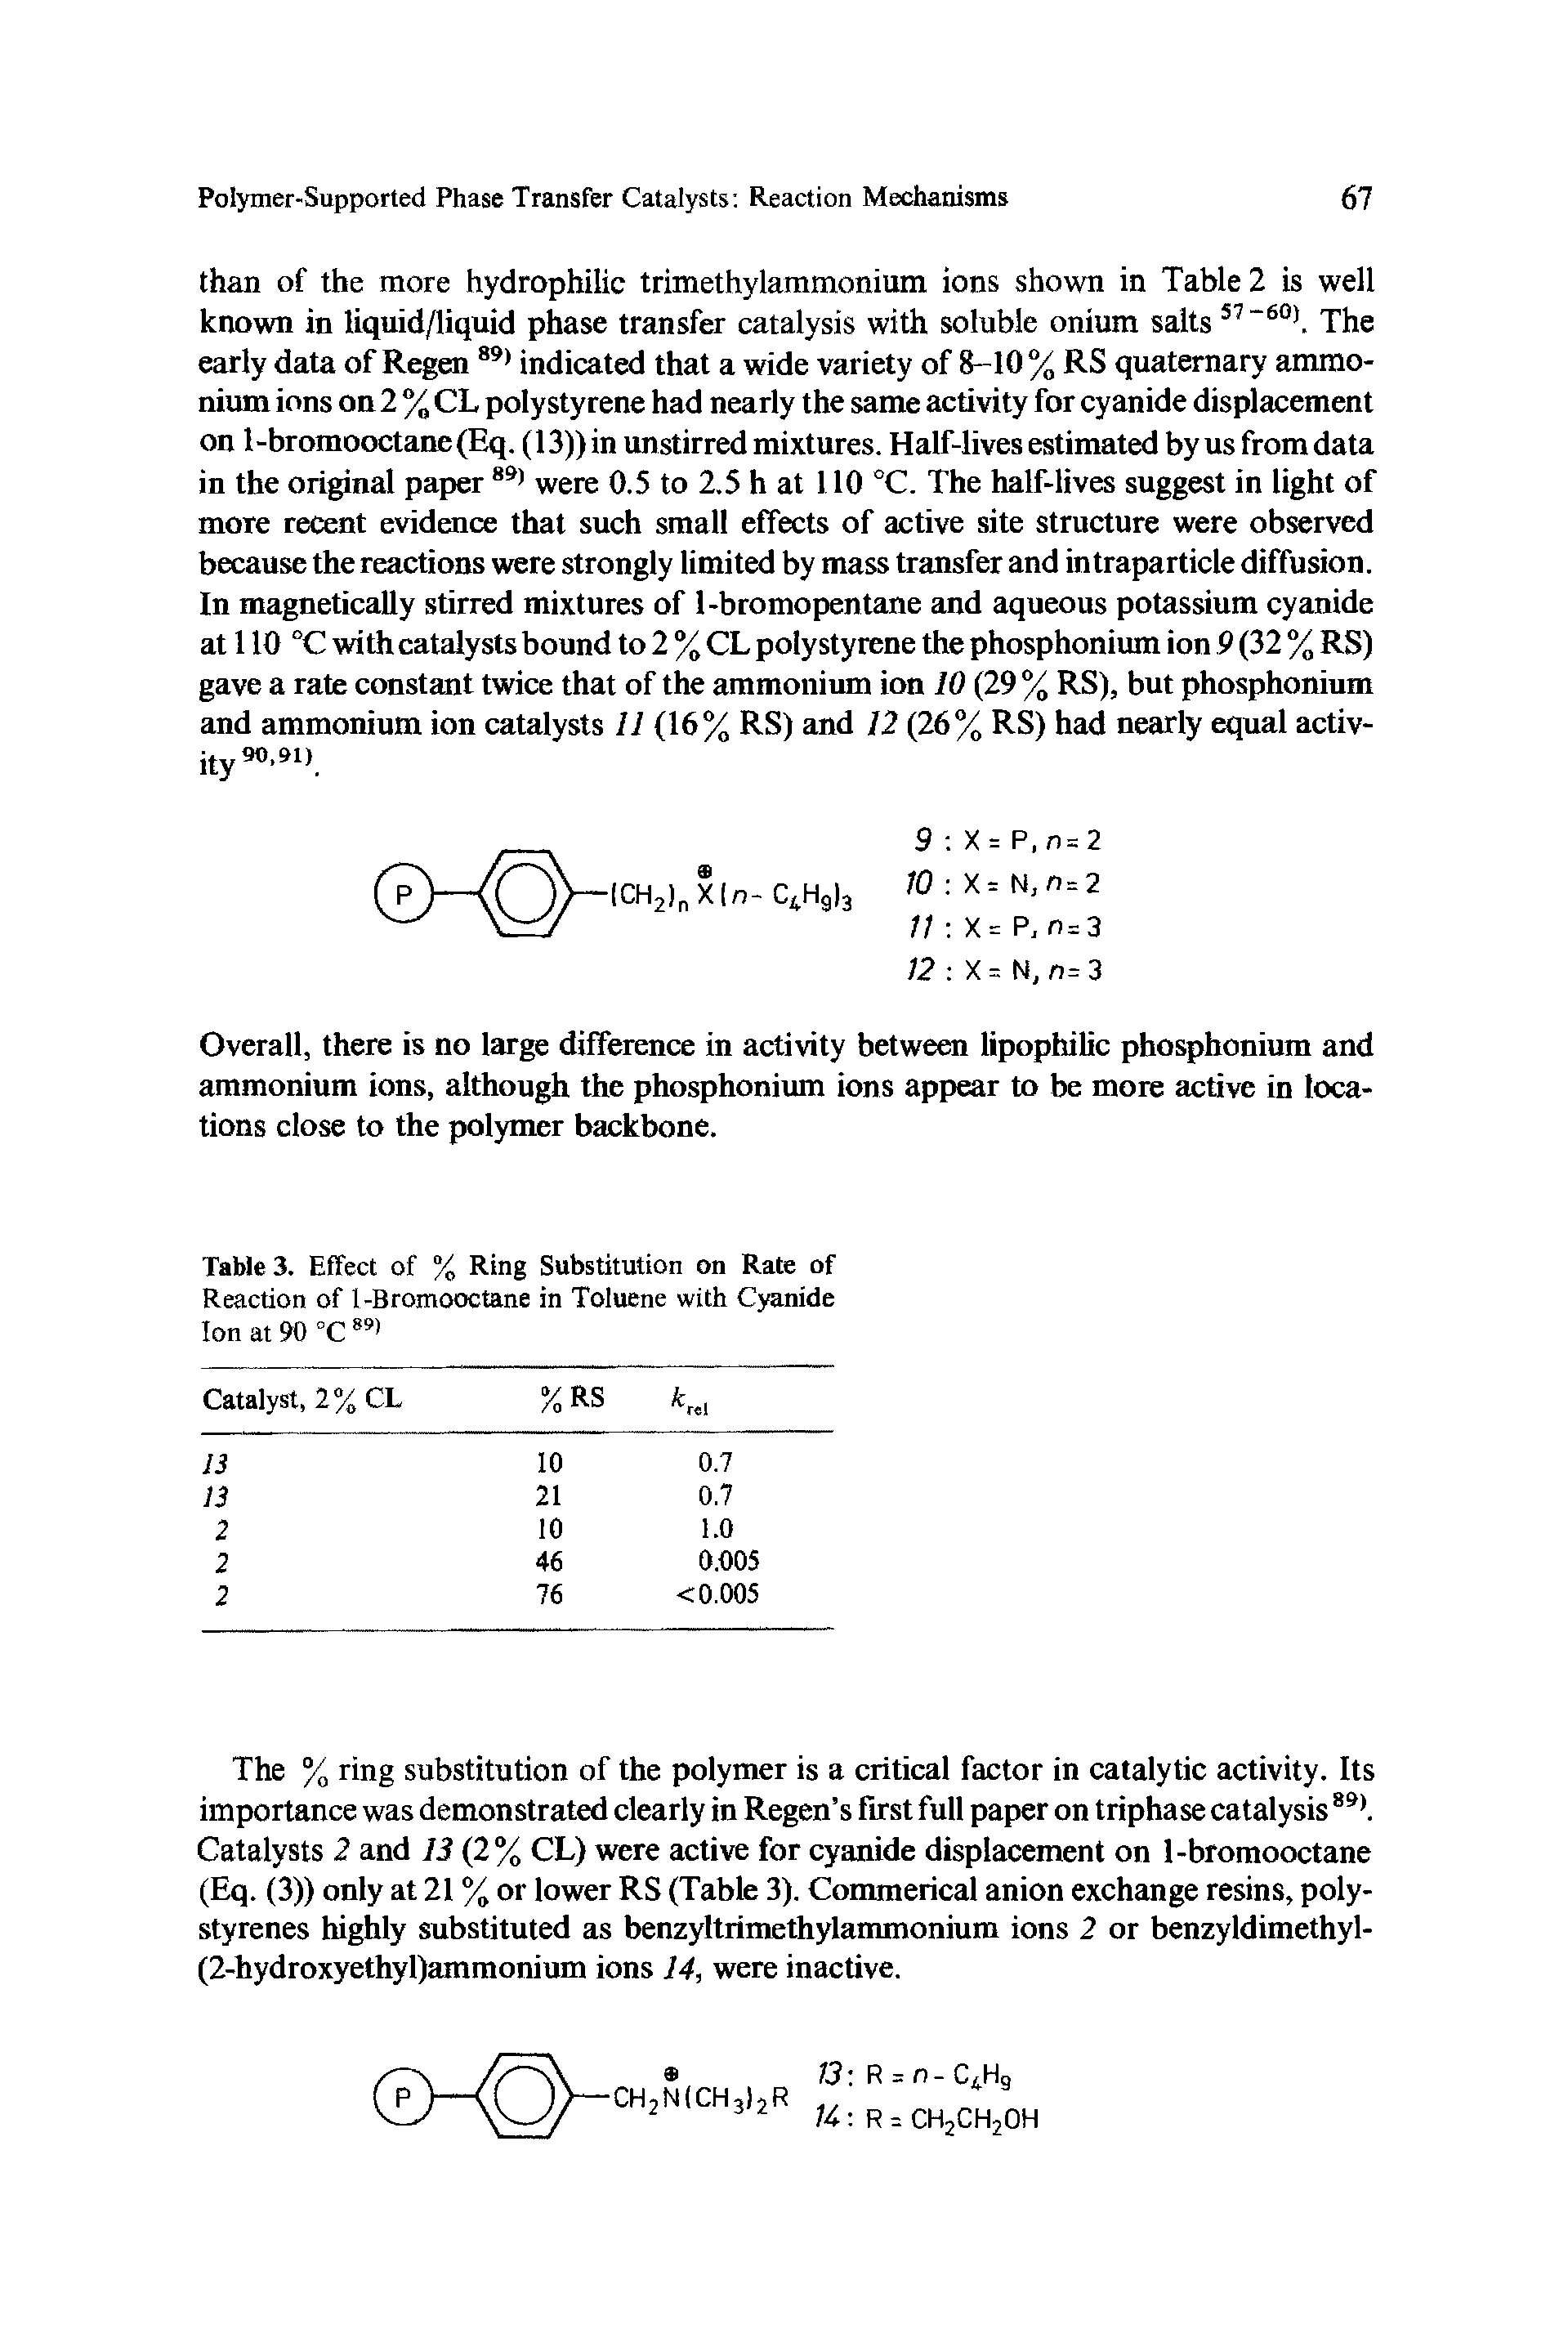 Tables. Effect of % Ring Substitution on Rate of Reaction of 1-Bromooctane in Toluene with Cyanide Ion at 90 °C 89)...